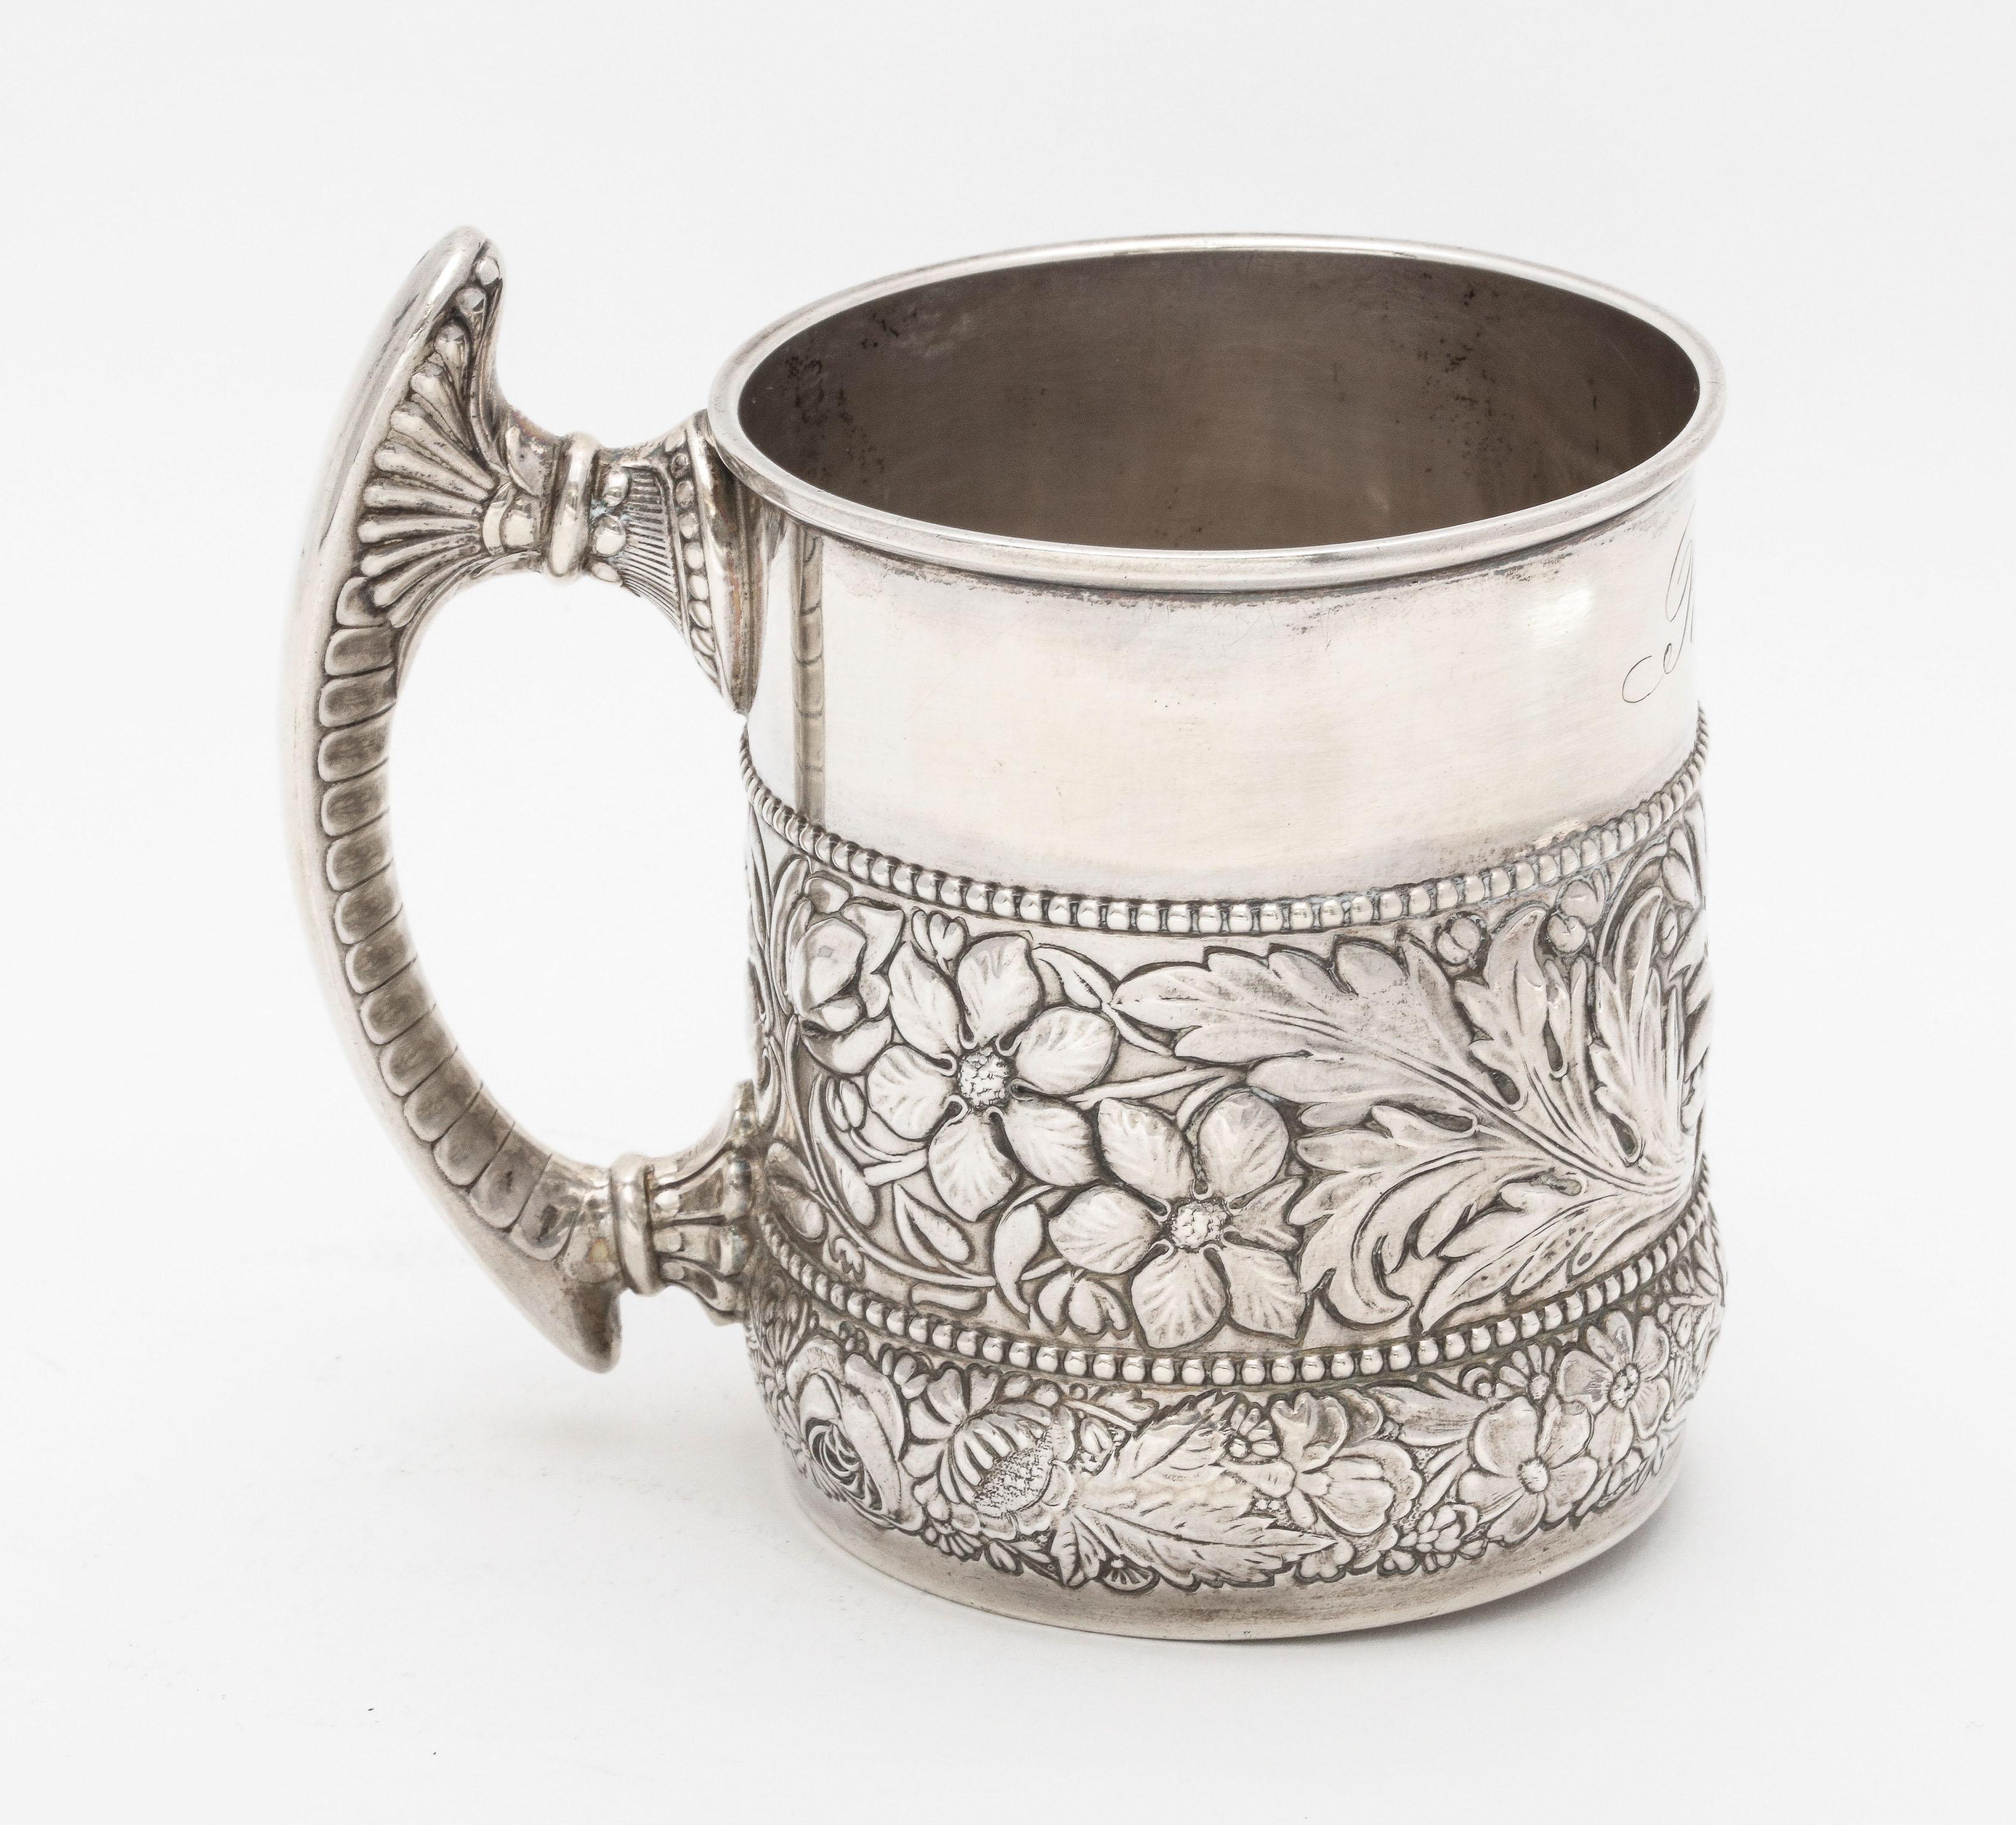 Victorian Period, sterling silver mug/cup, Gorham Mfg. Co, Providence, Rhode Island, year hallmarked for 1890. Decorated with leaves and flowers. Handle fans out in design. Measures 3 3/4 inches high (to top of handle) x 4 inches wide from edge of